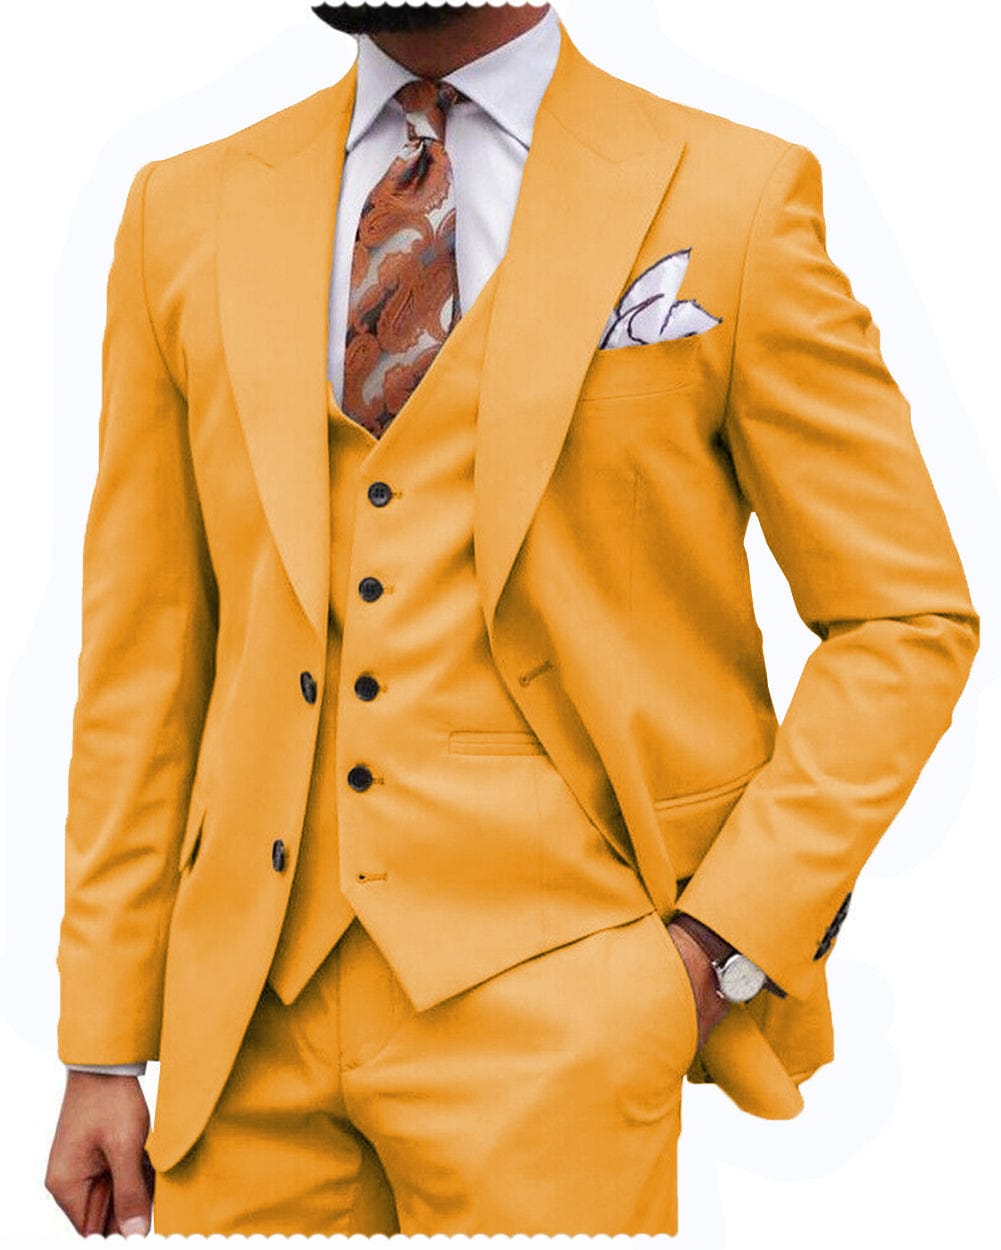 Buy Silver Magnate Slim Fit 3 Piece Suit Imported Fine Fabric Golden Yellow  (42) at Amazon.in